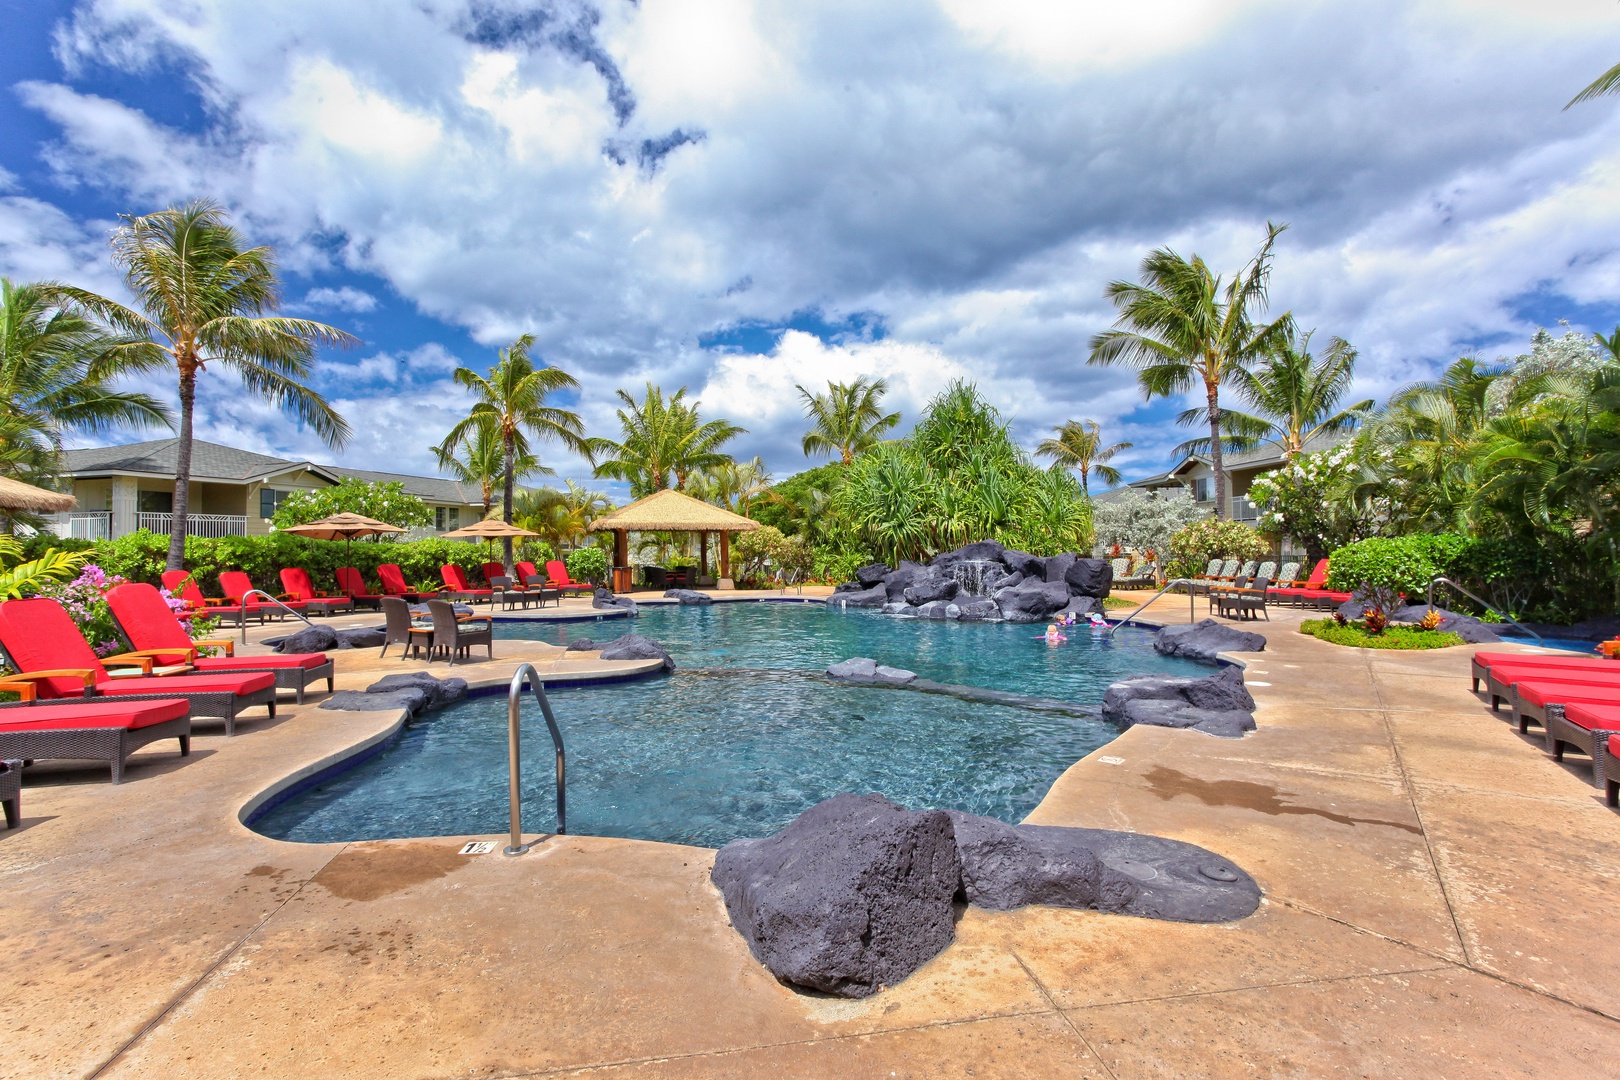 Kapolei Vacation Rentals, Ko Olina Kai 1035D - Go for a swim in the crystal blue waters at the pool.